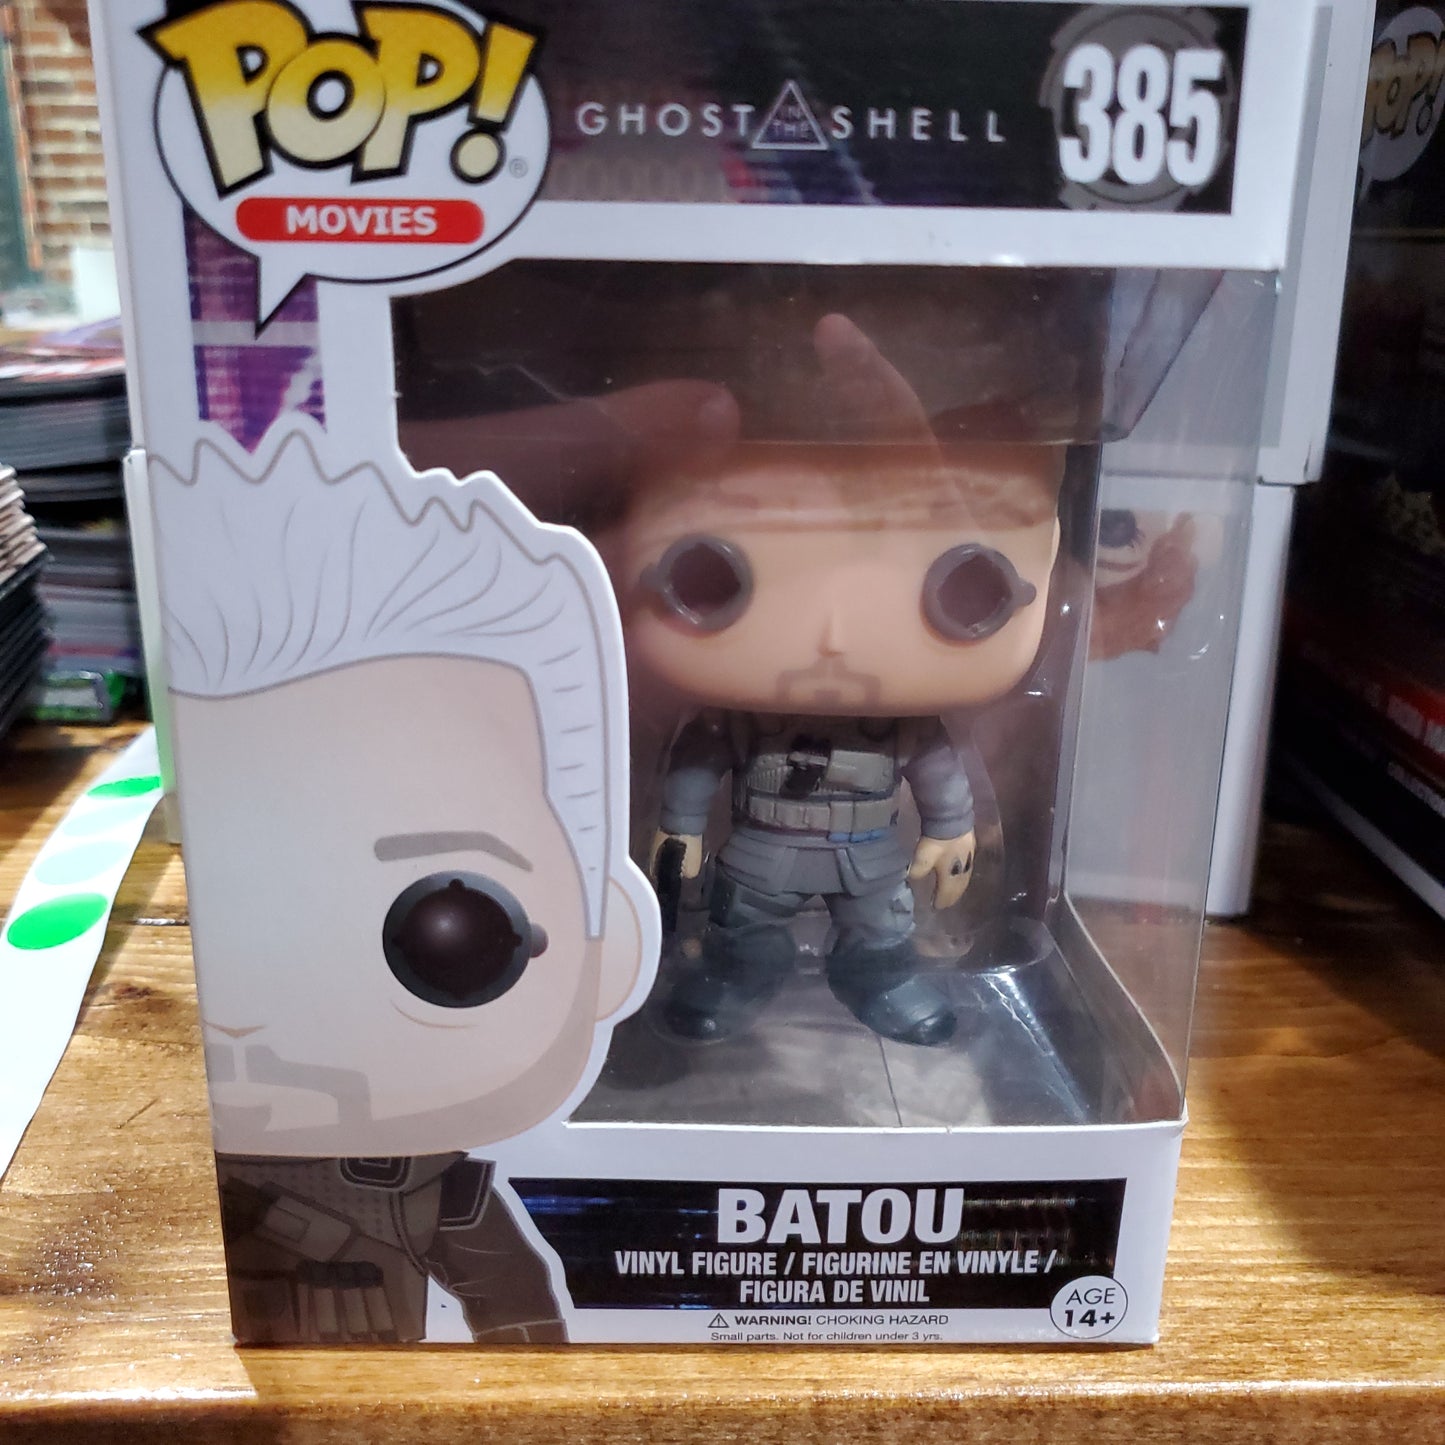 Movies Ghost in the Shell Batou Funko Pop! Vinyl Figure